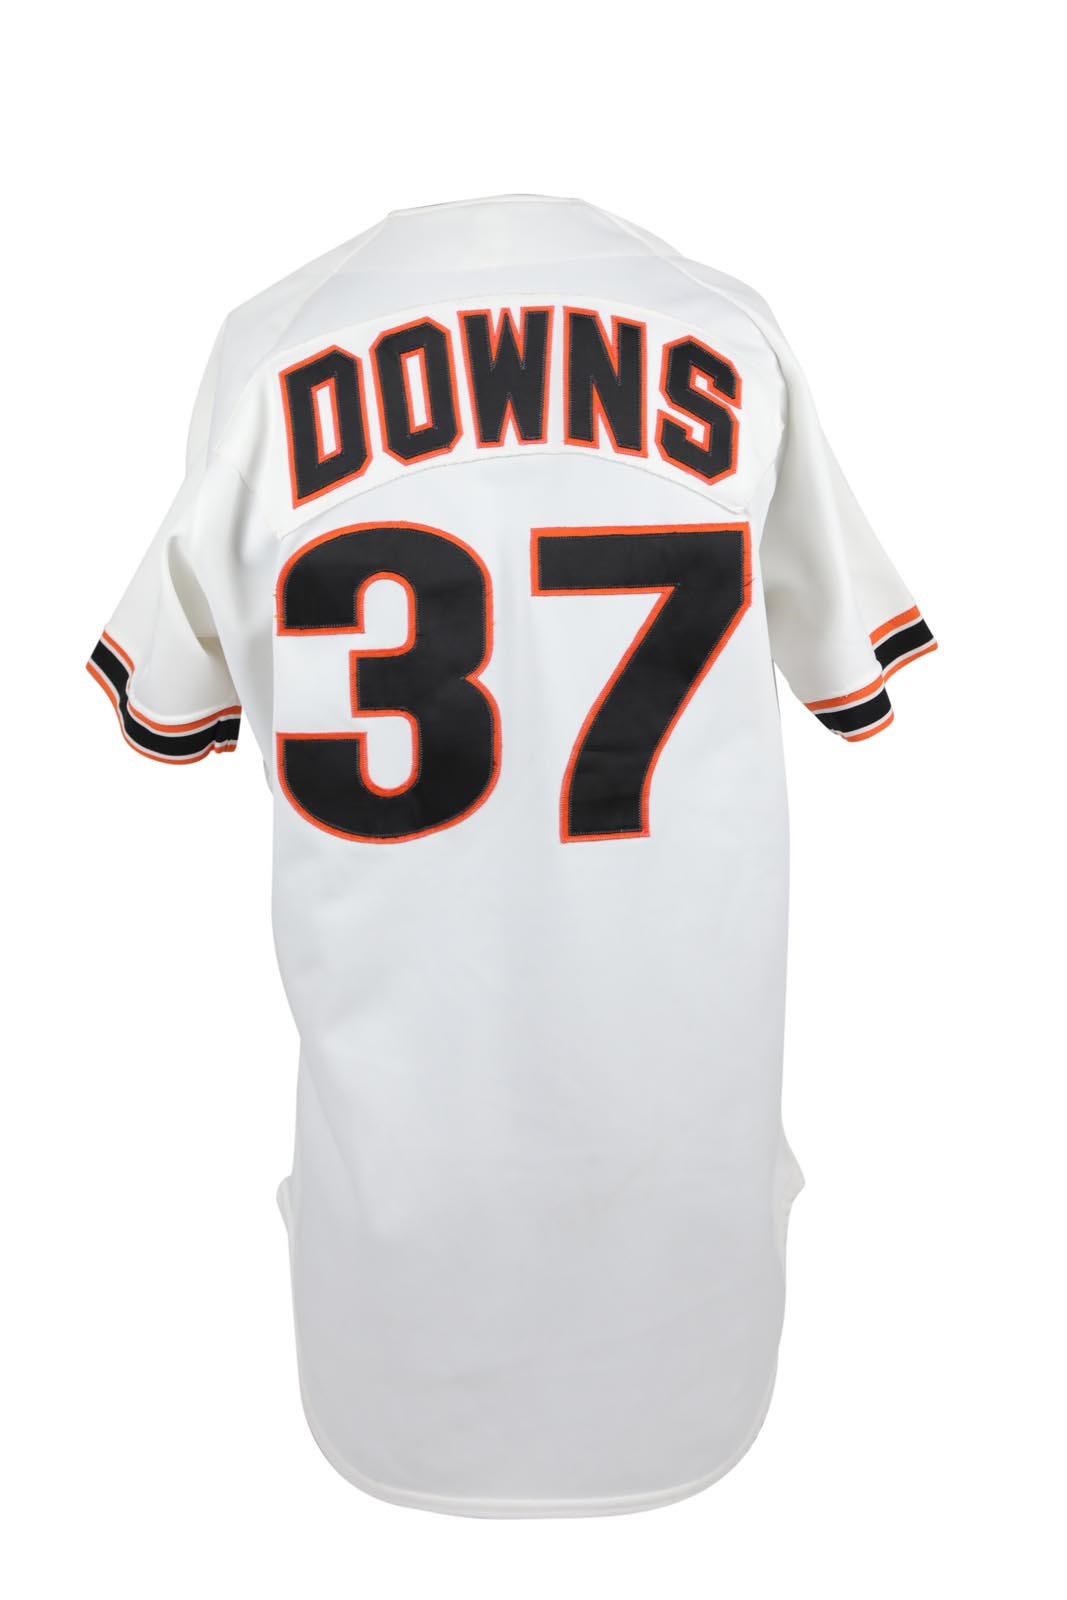 - 1987 Kelly Downs San Francisco Giants Game Worn Jersey